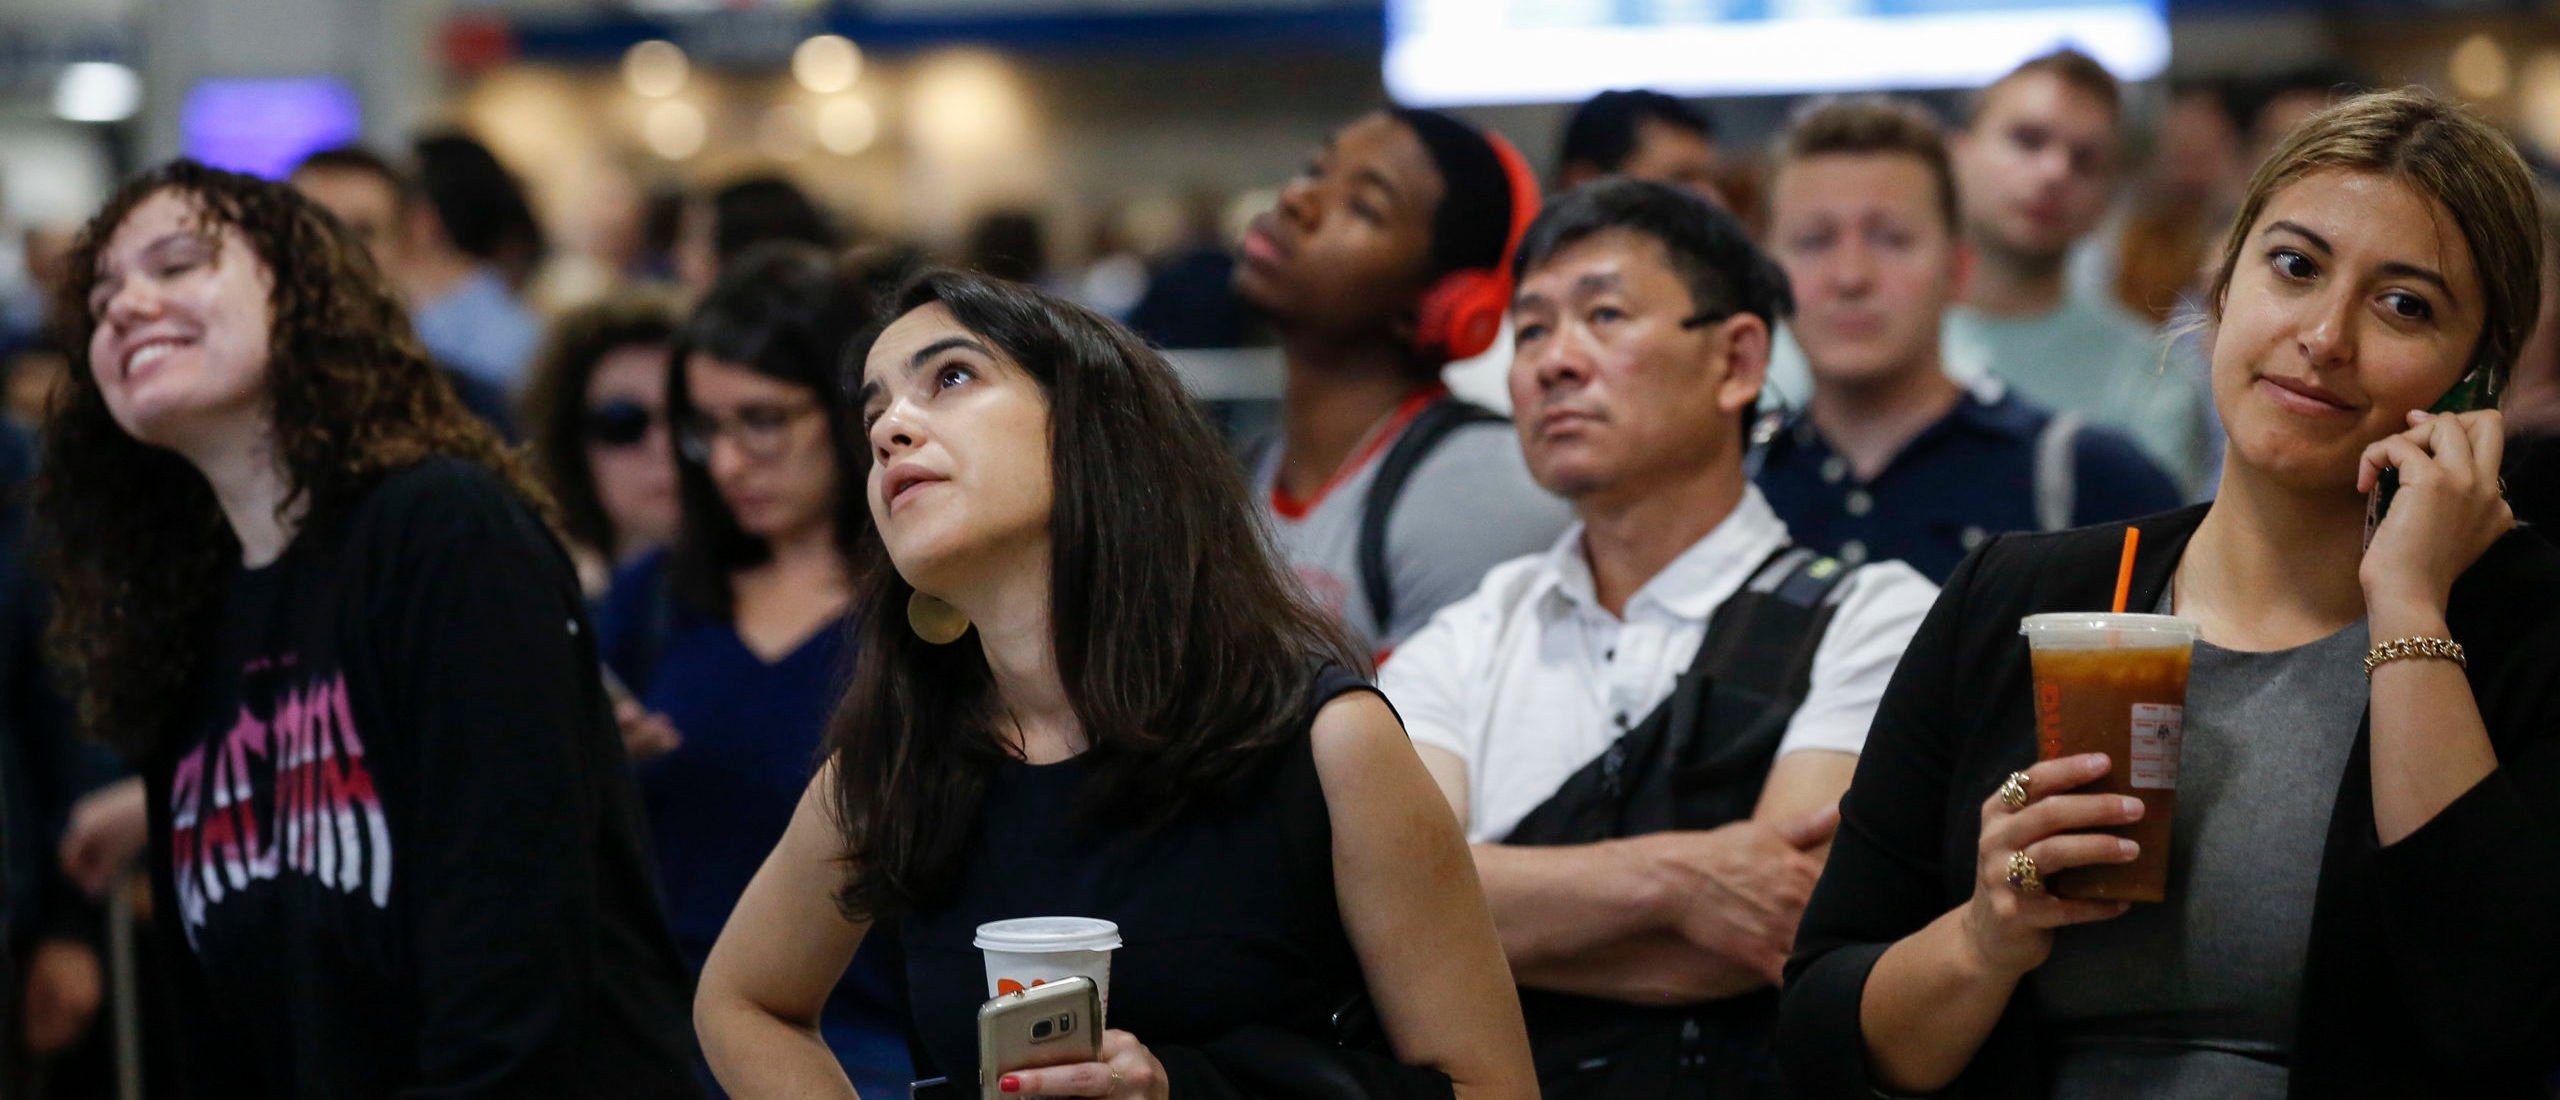 Passengers watch the departures board as they wait to board delayed Amtrak trains at New York Penn Station, June 19, 2019 in New York City. Power outage issues on Amtrak and New Jersey Transit train lines halted all trains in and out of New York Penn Station on Wednesday morning. (Photo by Drew Angerer/Getty Images)